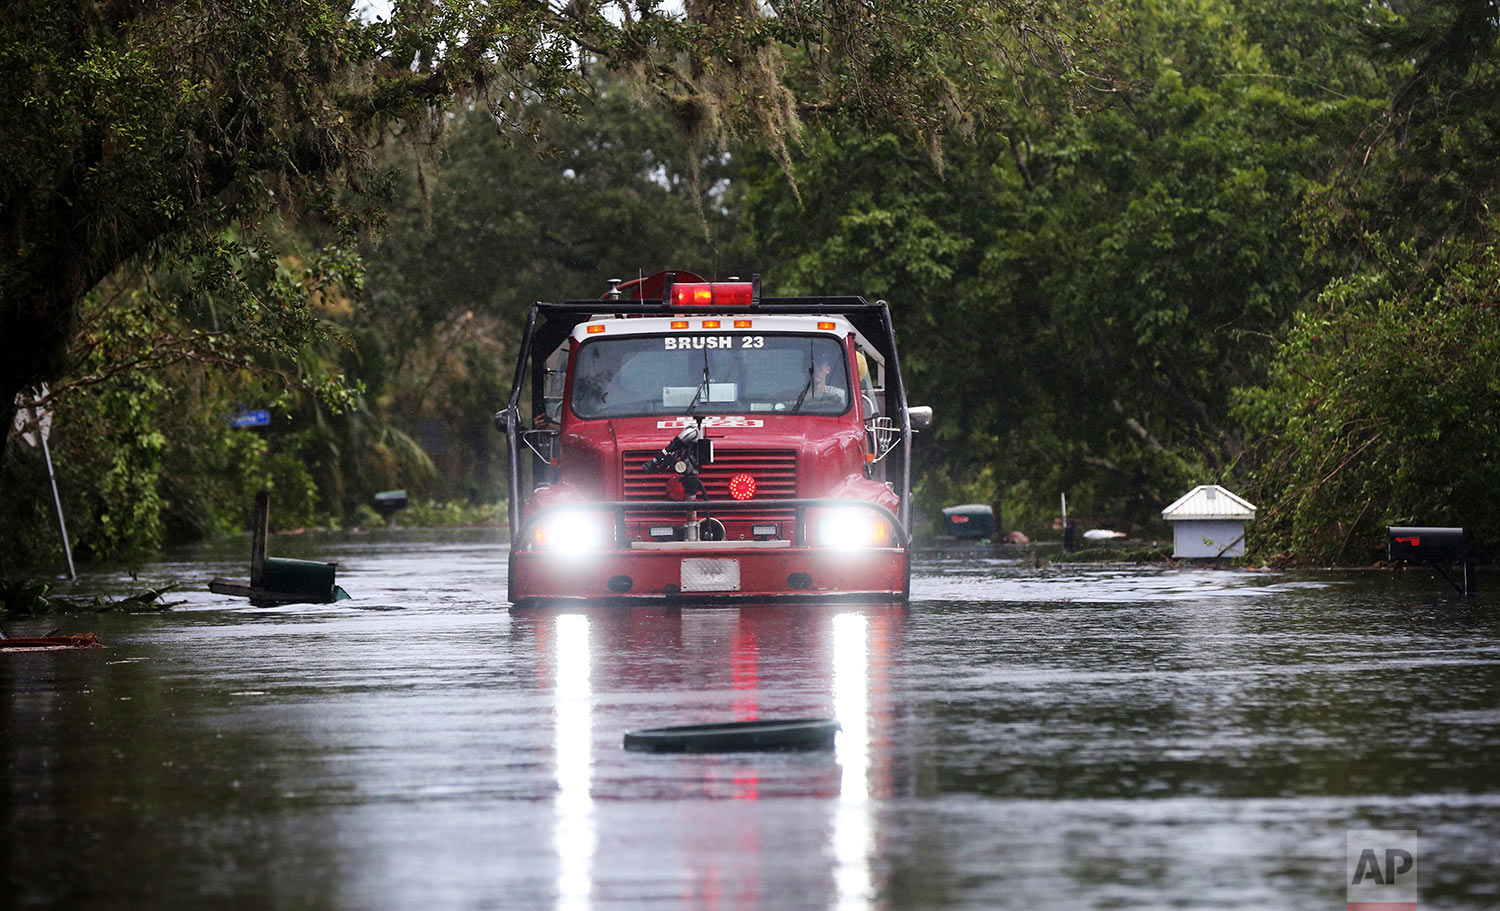  A fire truck drives through a flooded neighborhood, in the aftermath of Hurricane Irma, in Bonita Springs, Fla., Monday, Sept. 11, 2017. (AP Photo/Gerald Herbert) 